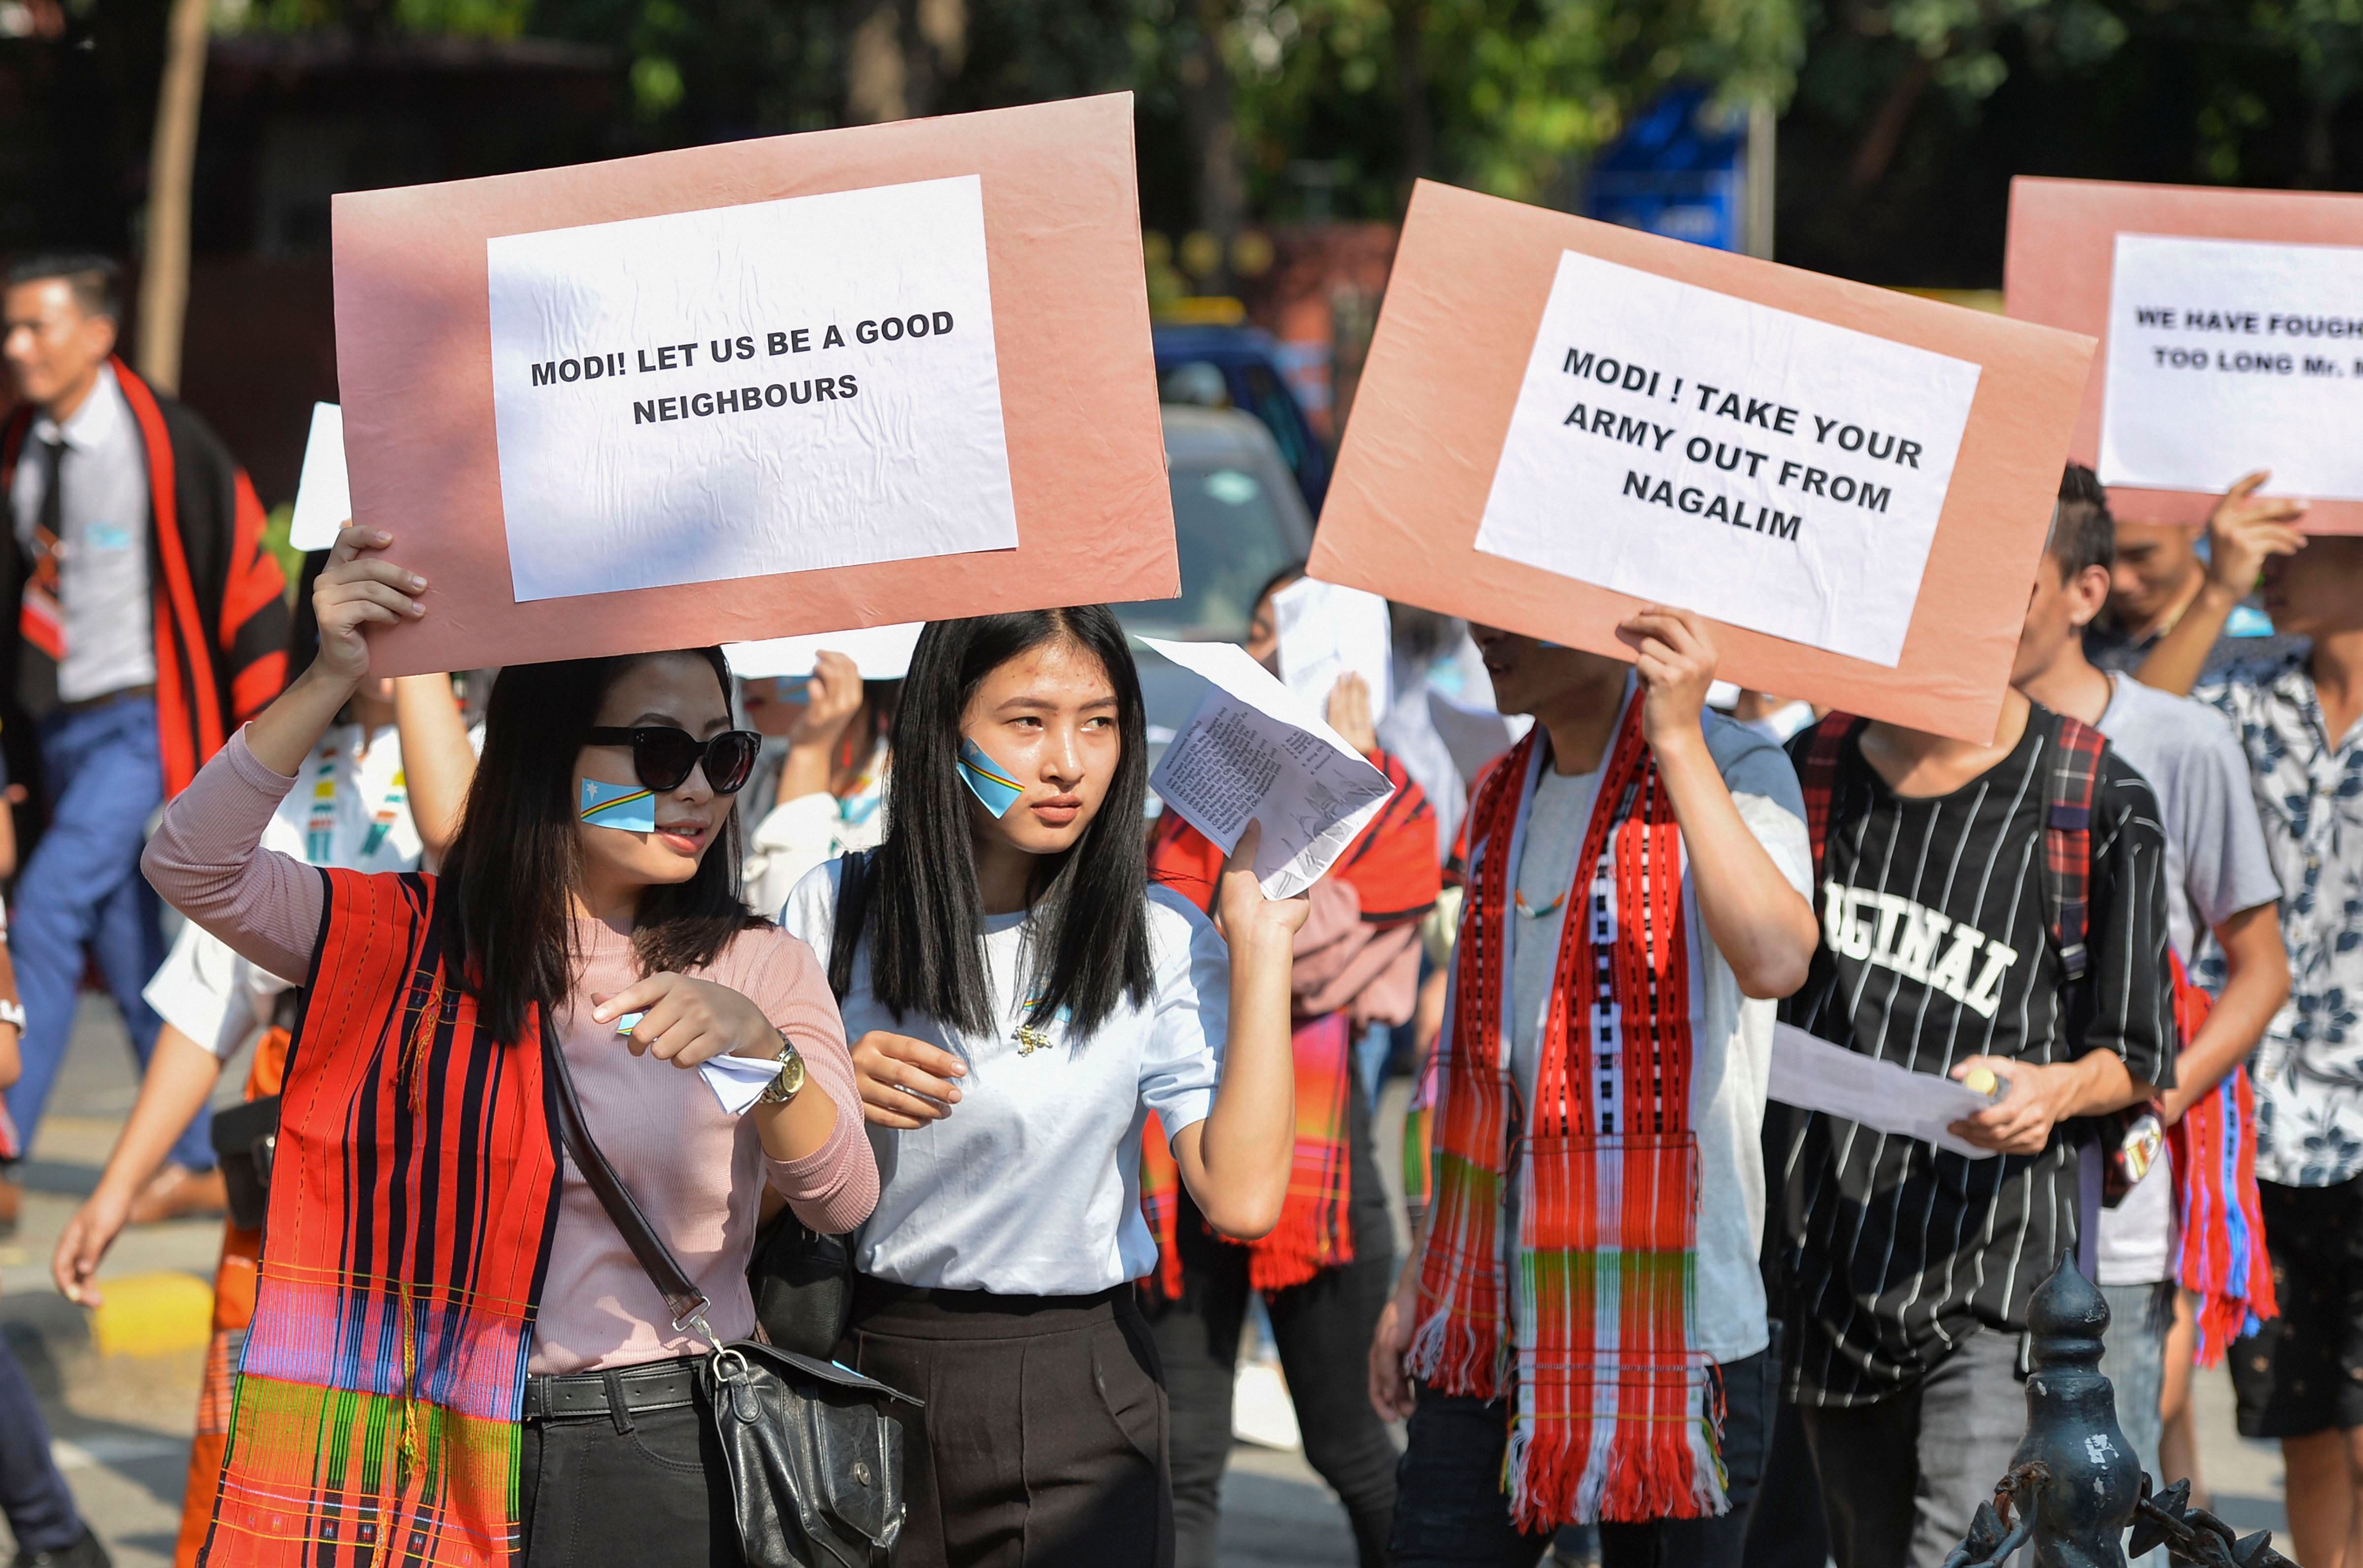 Delhi based students from Nagaland stage a protest march demanding solution to the issue of Naga peace talks, and a decision on the framework agreement, in New Delhi. (PTI Photo)